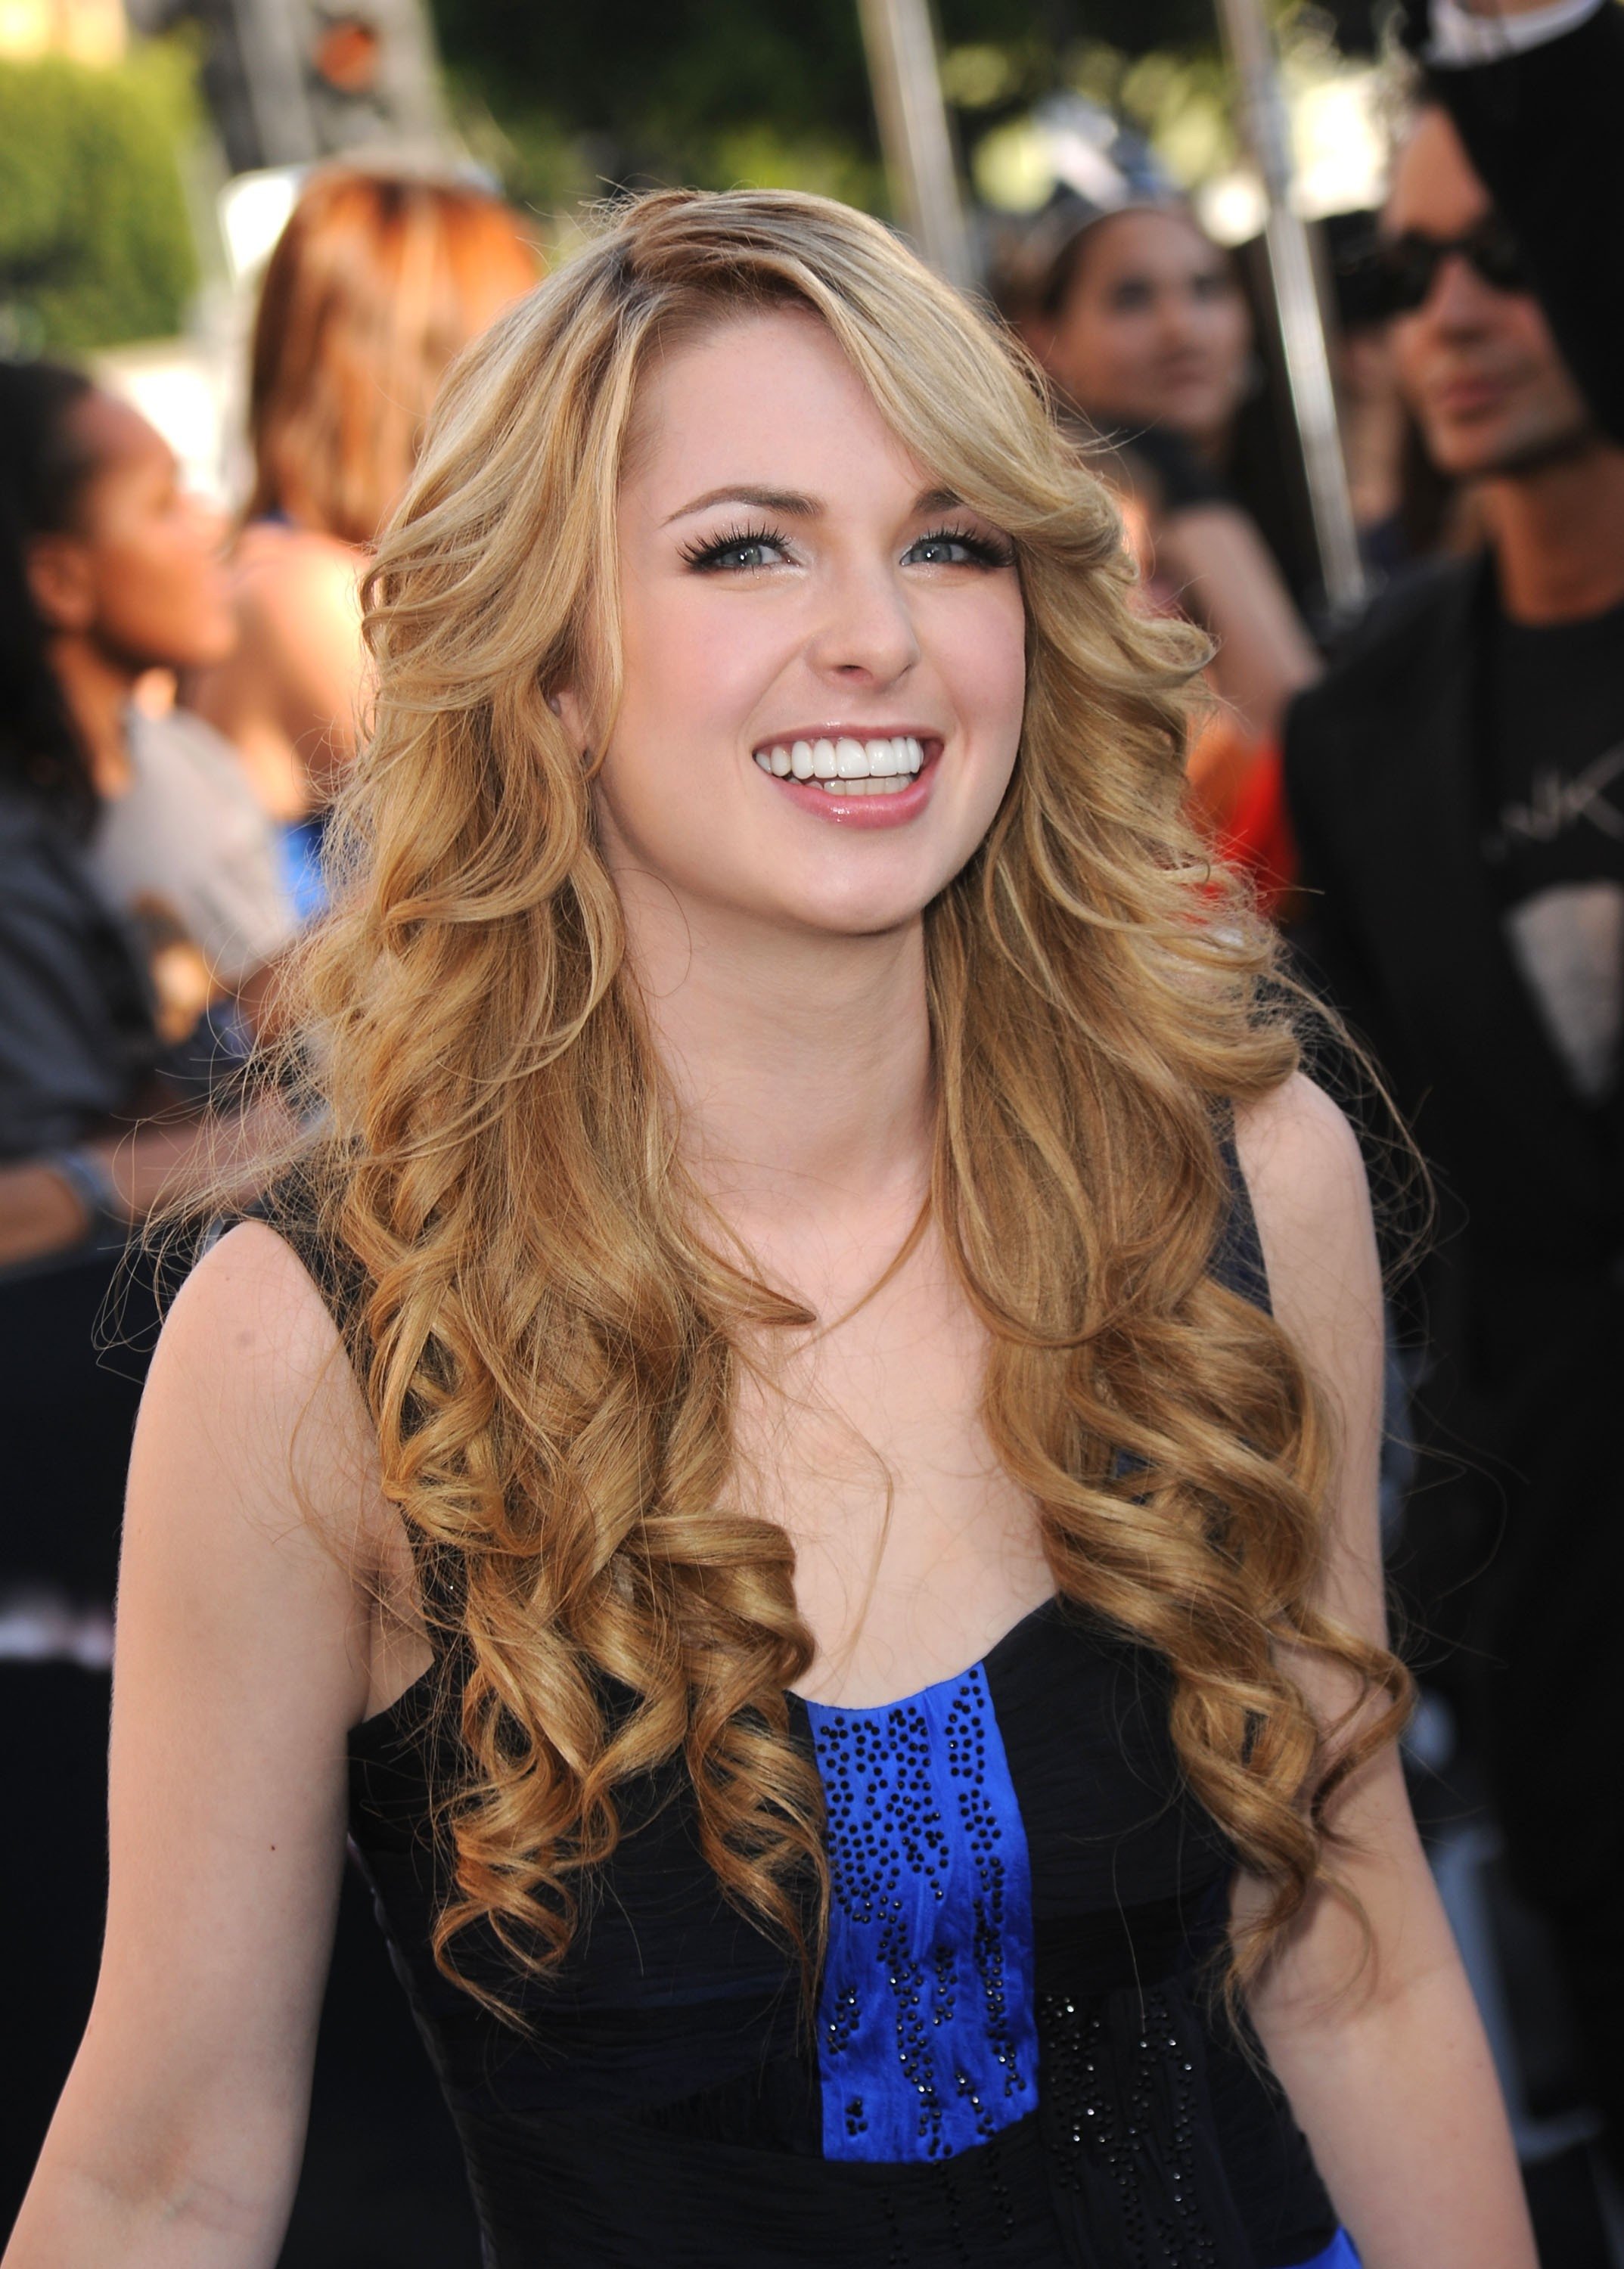 Download Wallpapers, Download blondes women smiling kirsten prout 2147x3000...